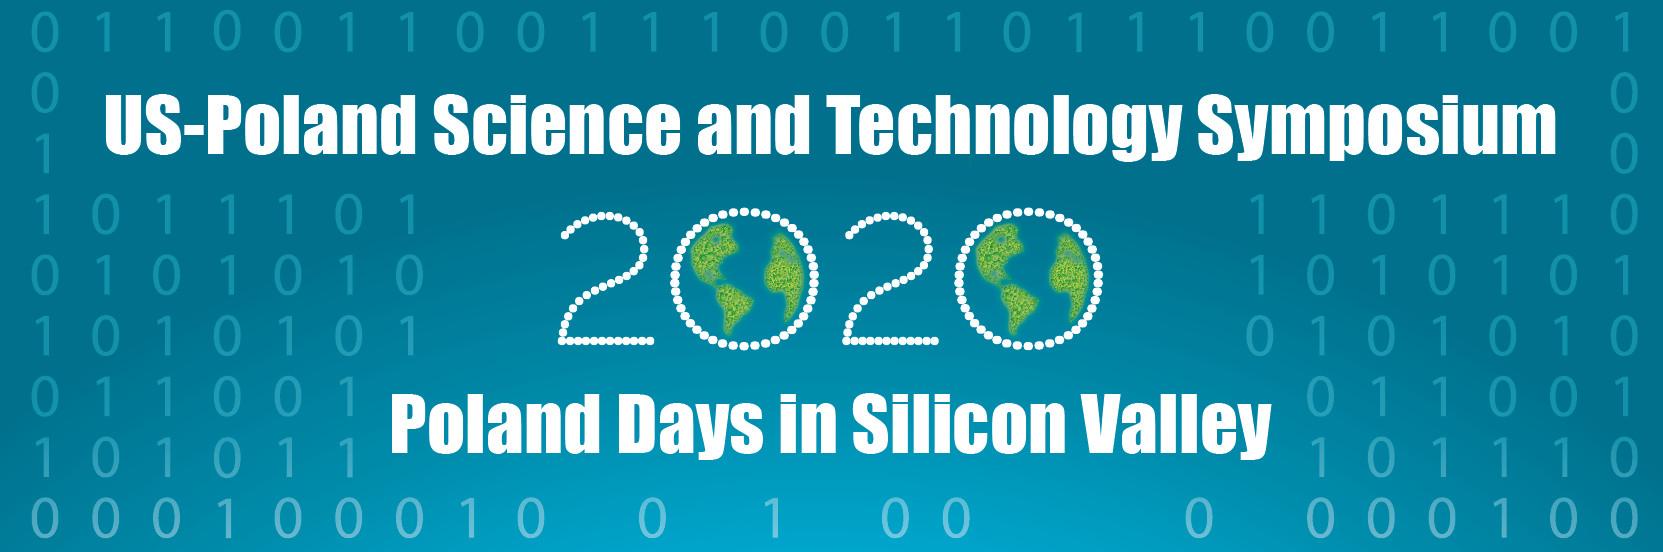 SILICON VALLEY POLAND DAYS 2020 – ARTIFICIAL INTELLIGENCE AND AUGMENTED REALITY